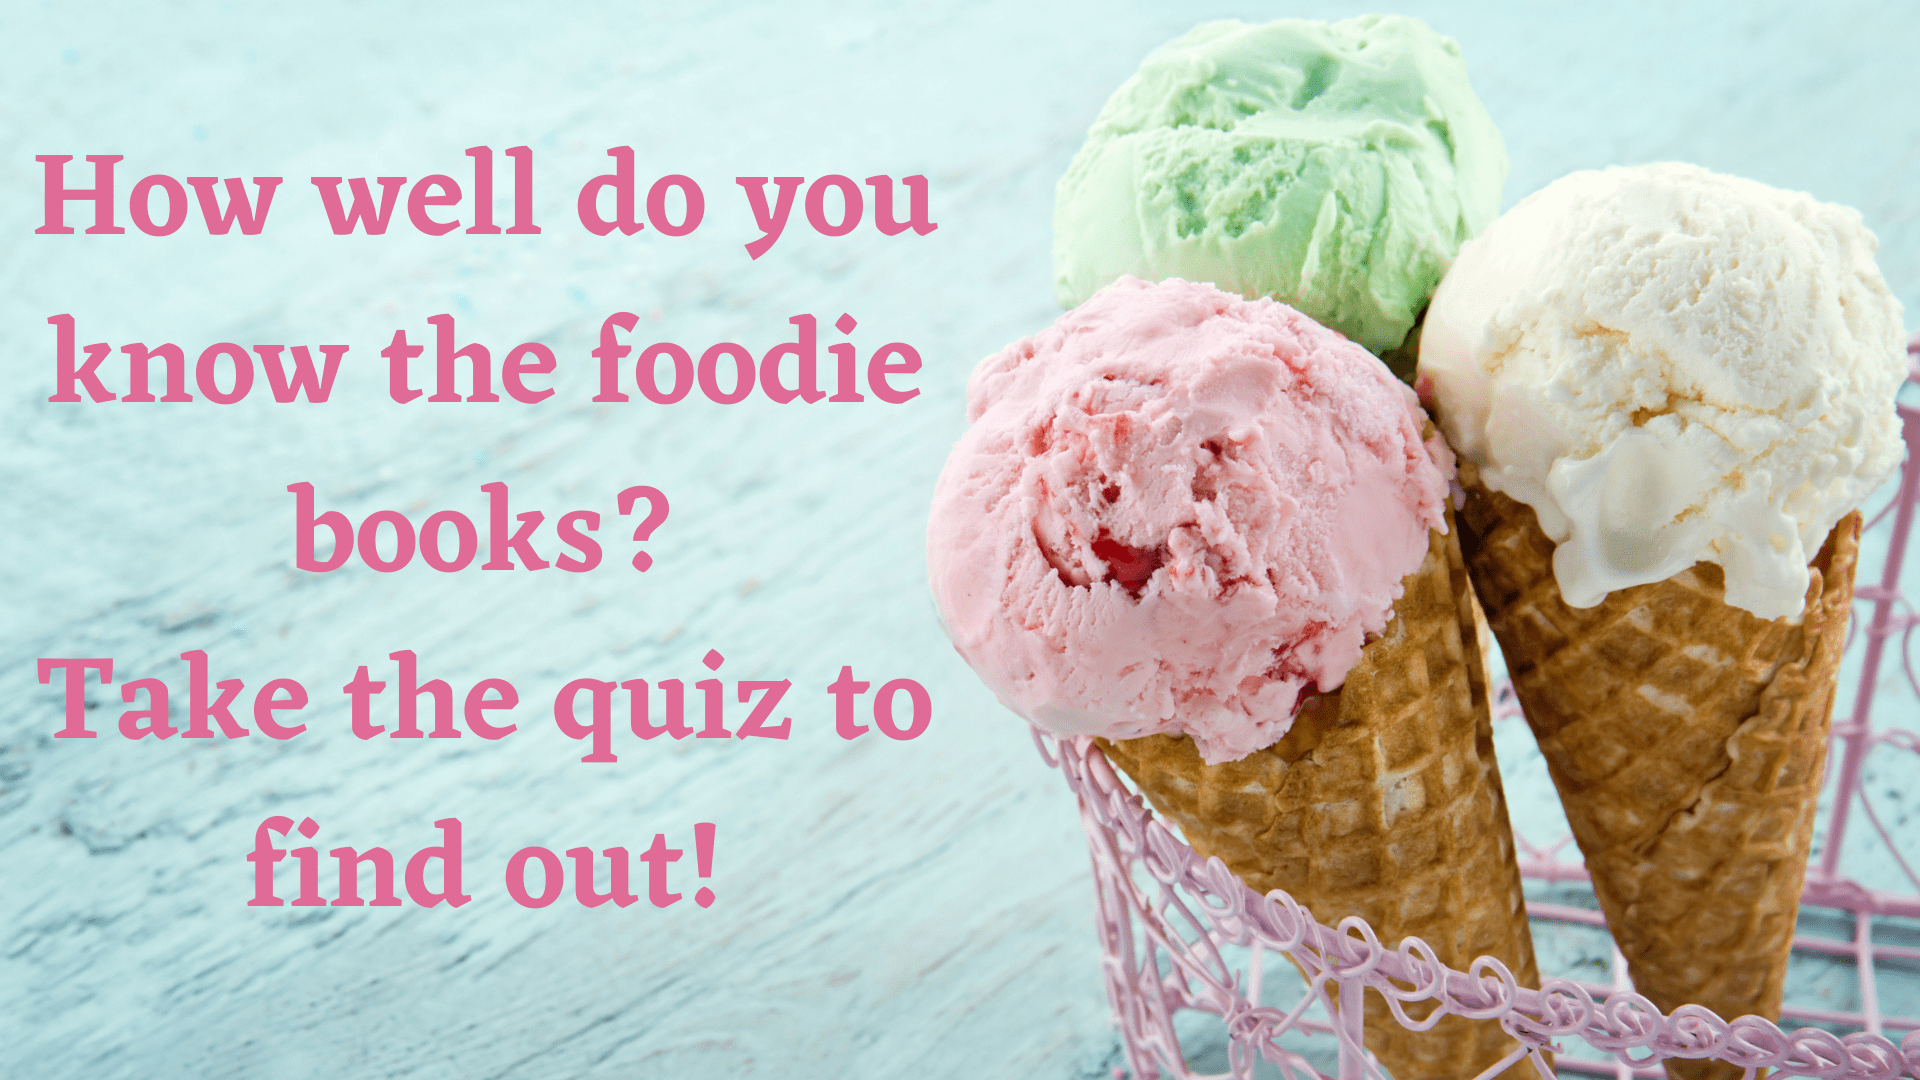 How Well Do You know the Foodie Books?